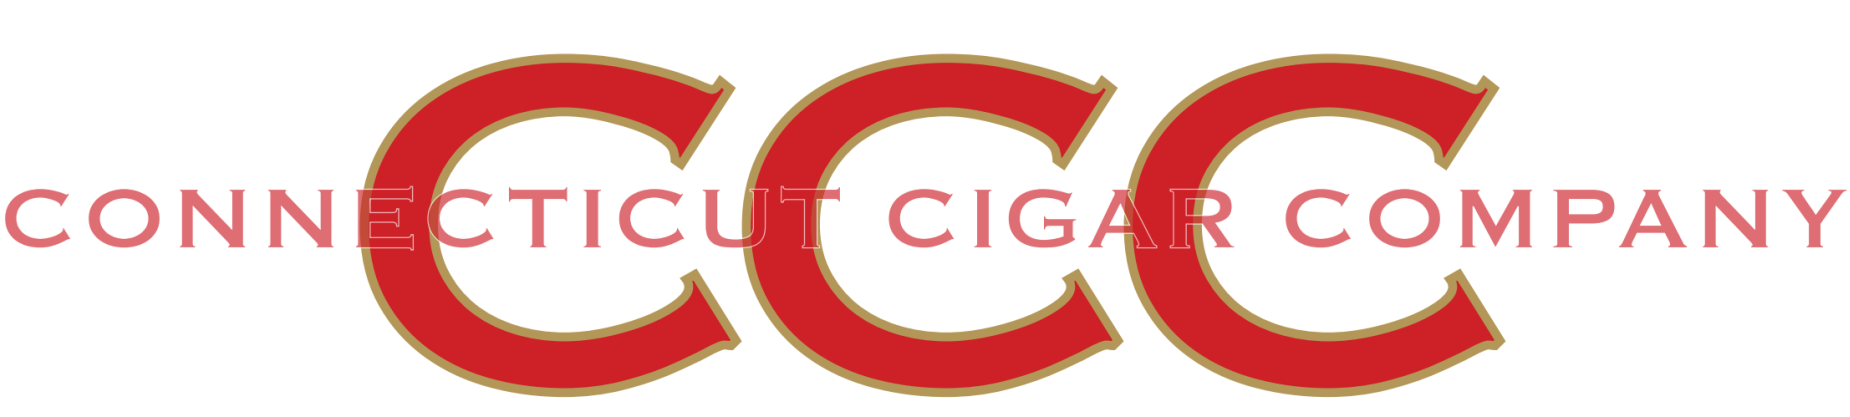 Premium Hand-Rolled Cigars | Connecticut Cigar Company